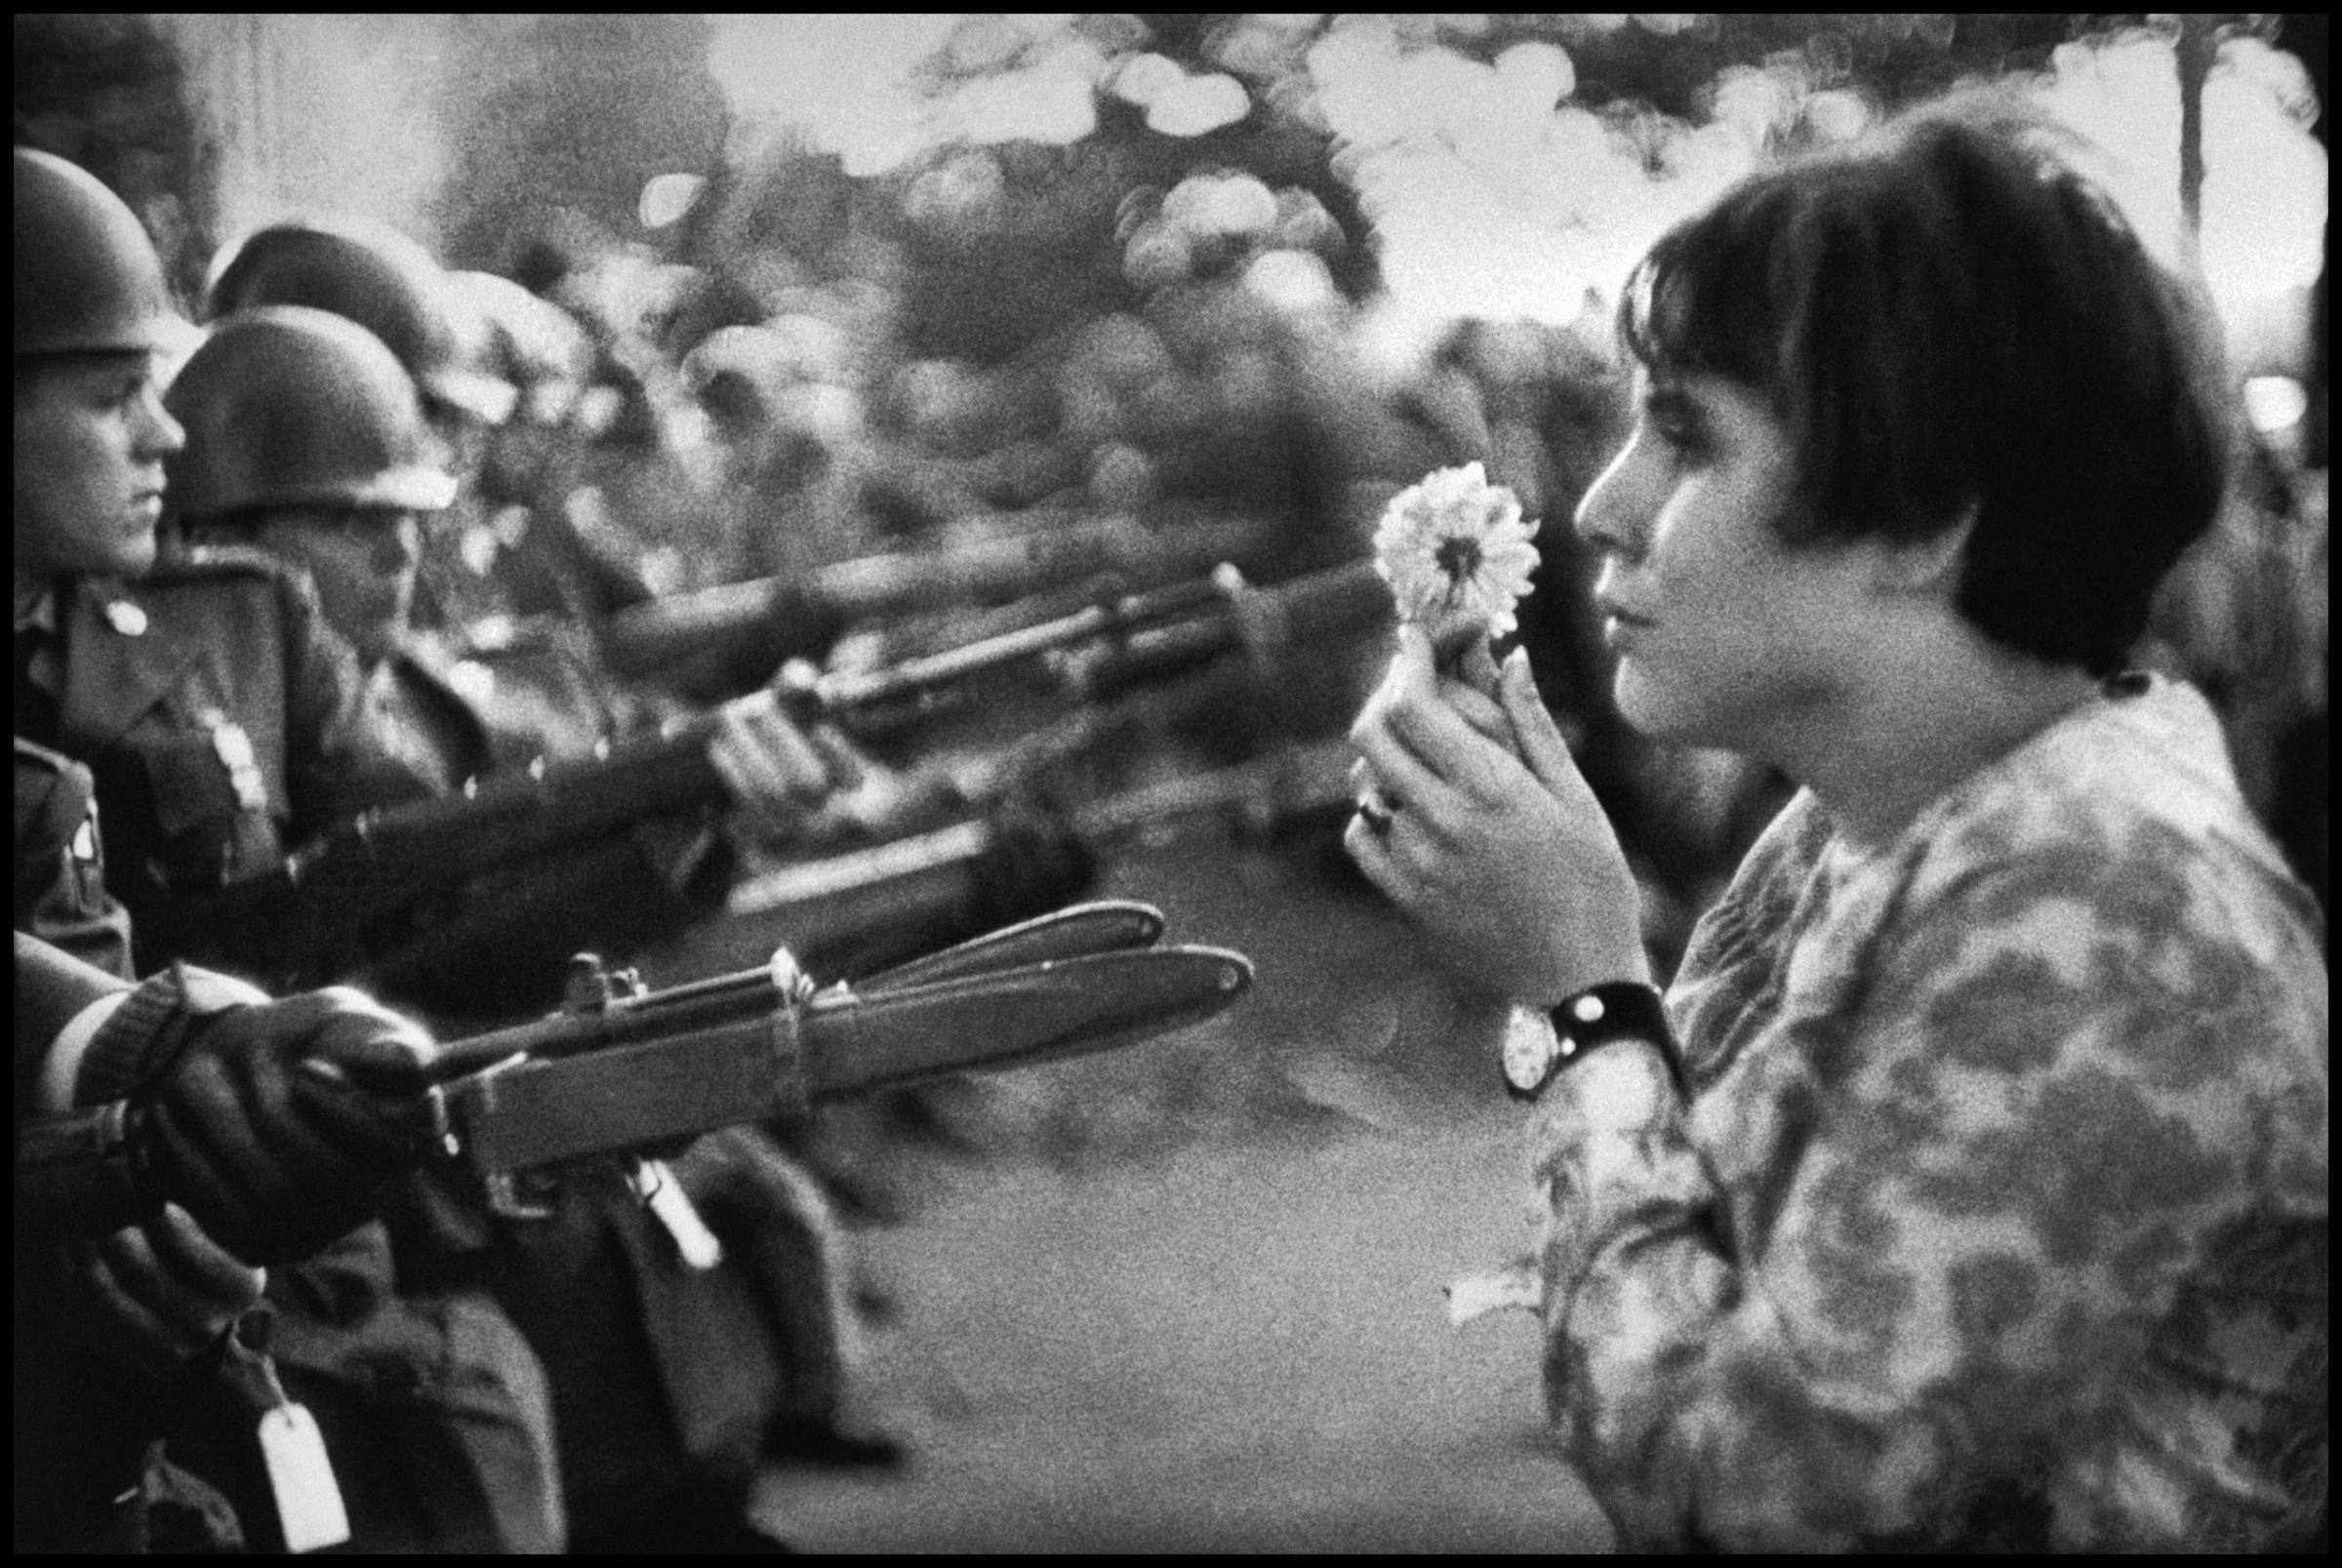 Jan Rose Kasmir confronts the American National Guard outside the Pentagon during the 1967 anti-Vietnam march in Washington on Oct. 21, 1967.